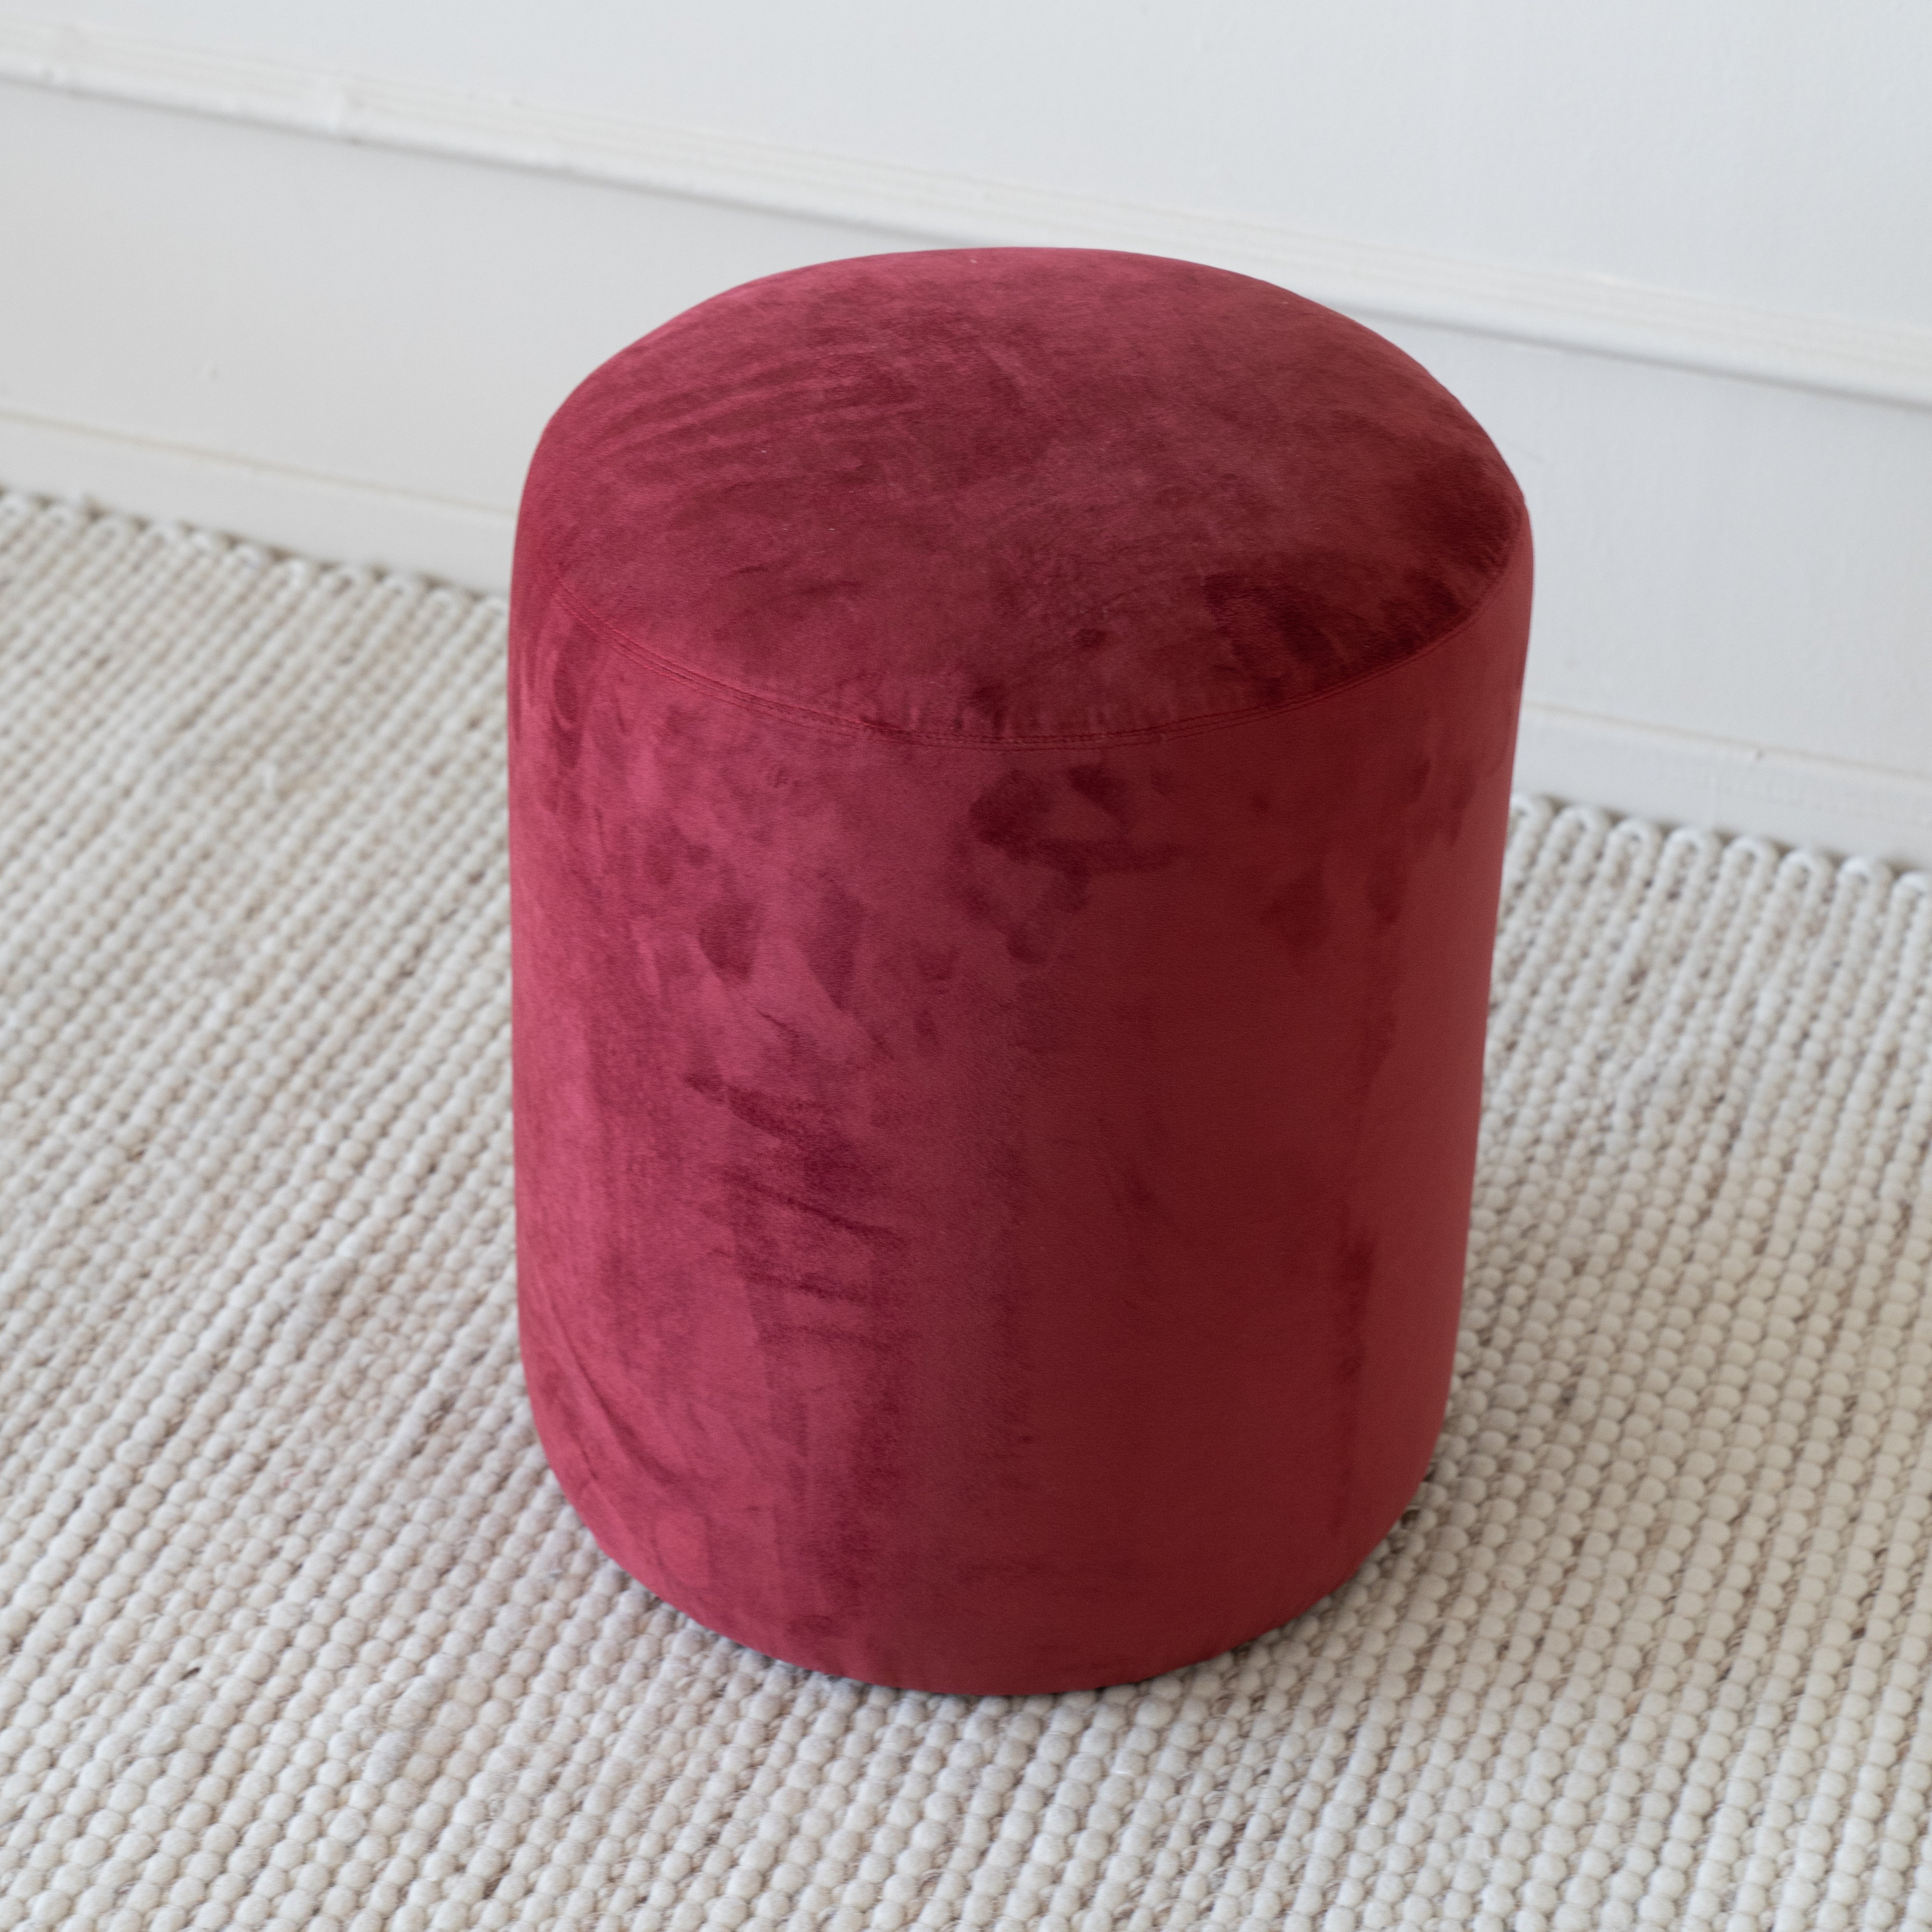 Contour Stool - Red Velvet - Wood and Steel Furnitures